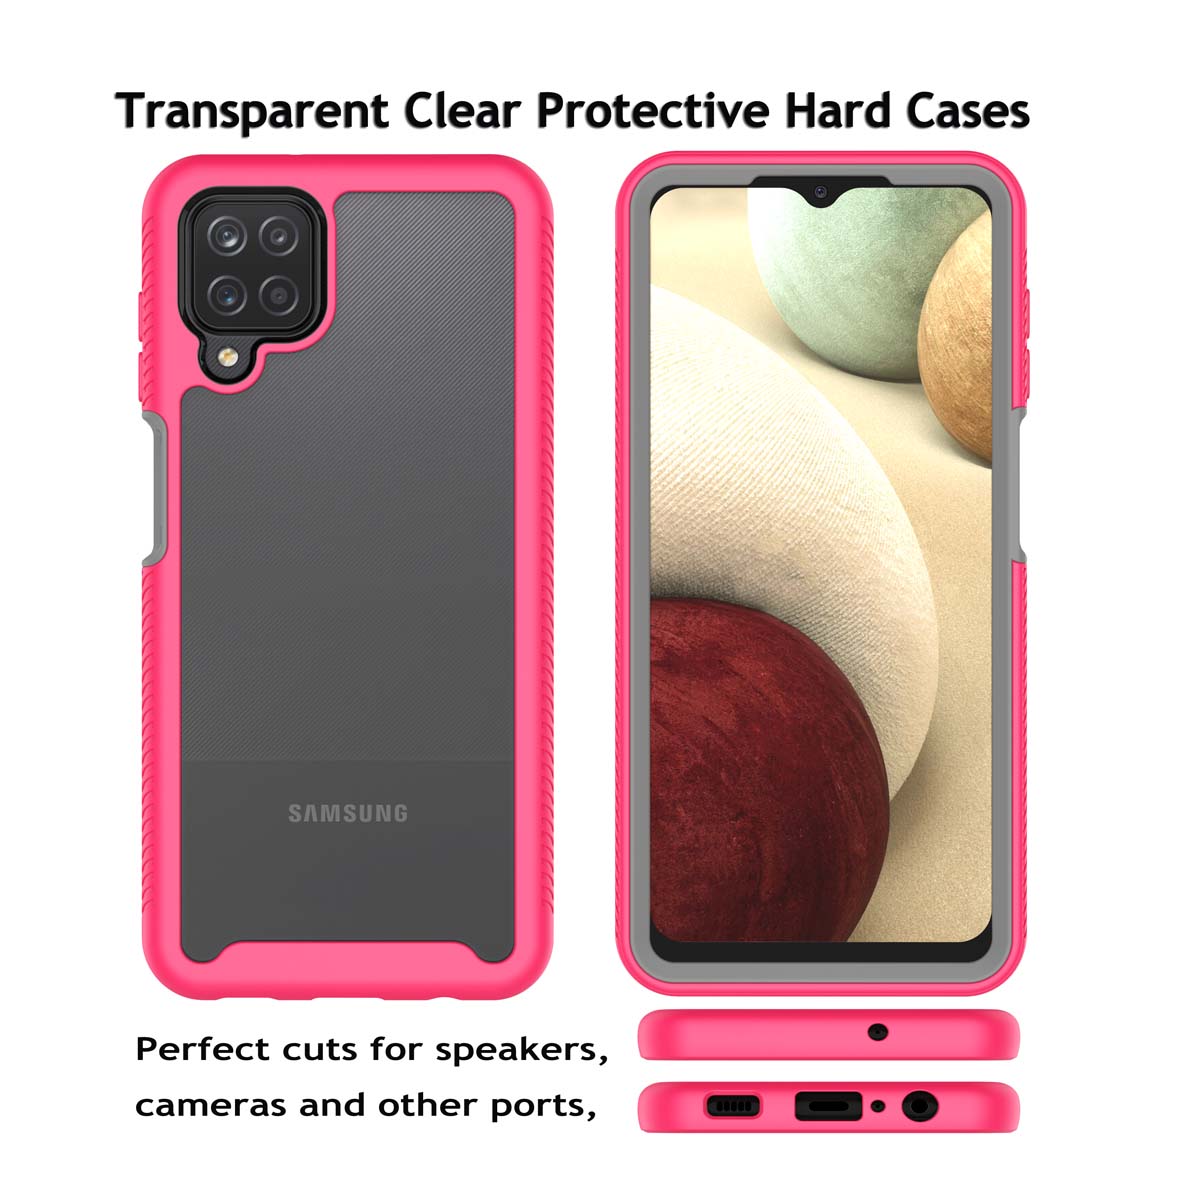 Galaxy A12 5G Case, Sturdy Case for 2021 Samsung Galaxy A12 5G, Njjex Full-Body Rugged Transparent Clear Back Bumper Case Cover for Samsung Galaxy A12 5G 6.5" 2021 -Hot Pink - image 2 of 10